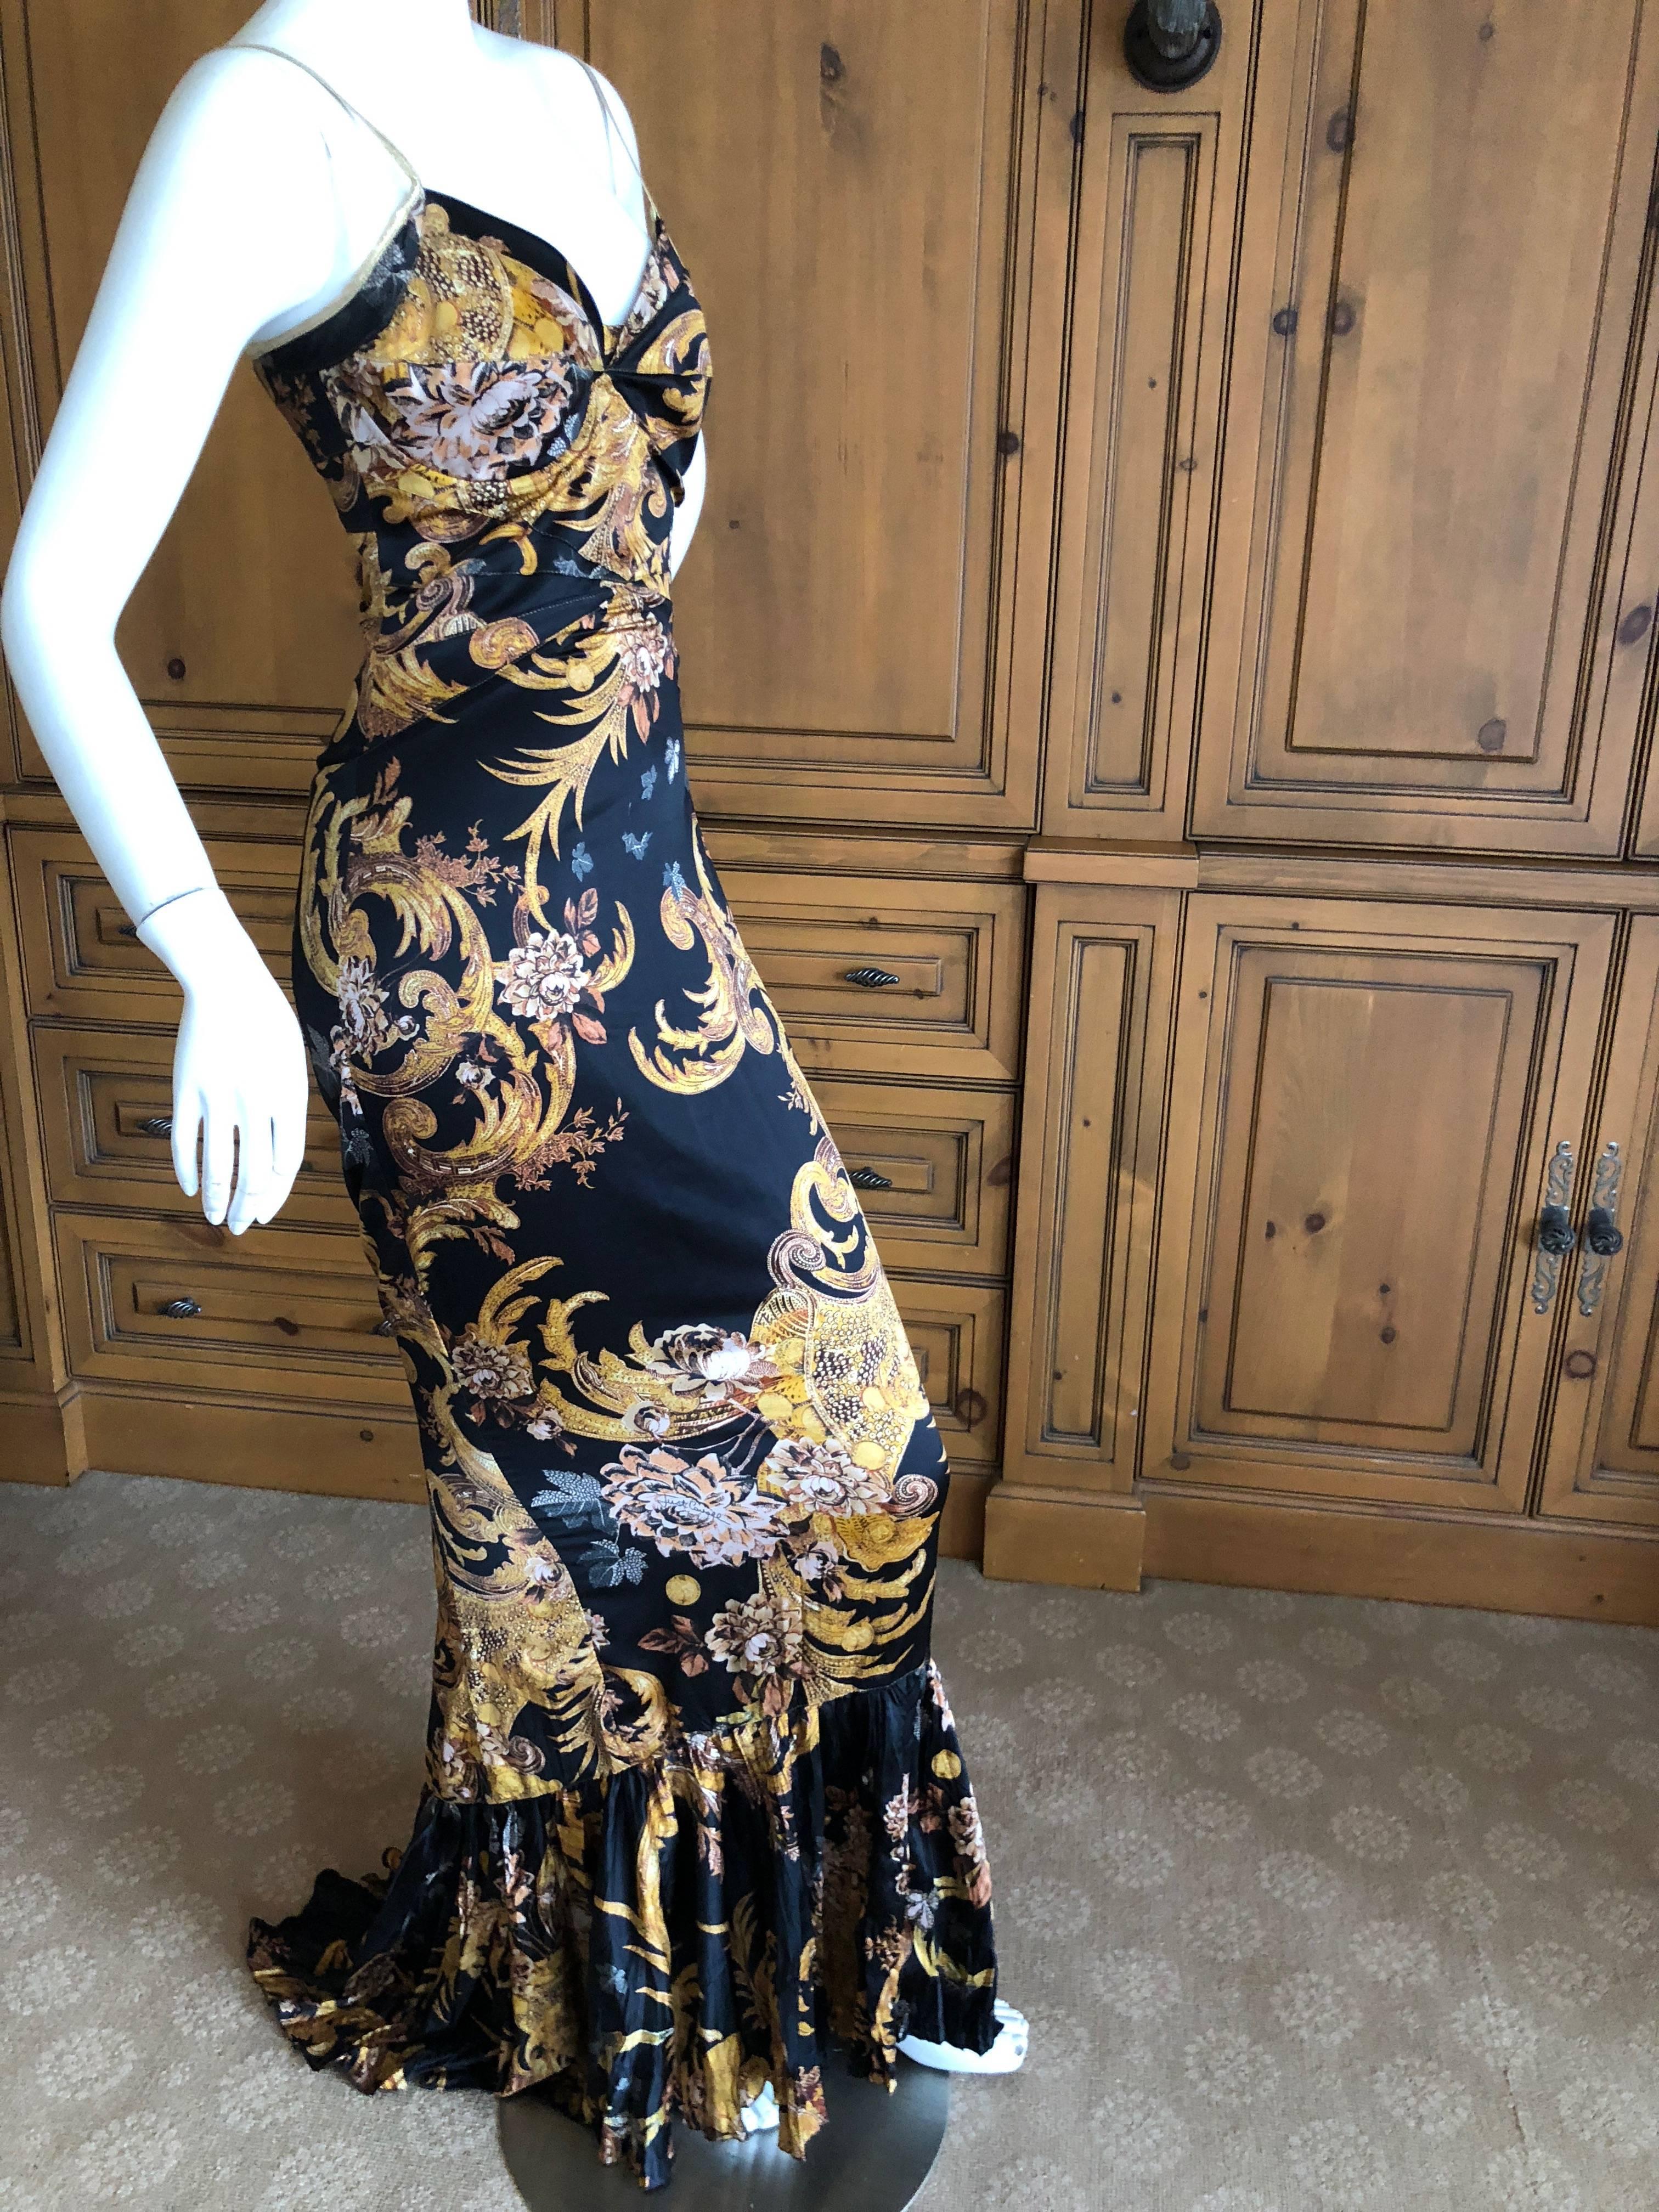 Roberto Cavalli Elegant Fishtail Mermaid Back Evening Dress.
This is so pretty, with a rich gold print, and mermaid fishtail back.
Size 48, but runs small.
Bust 34